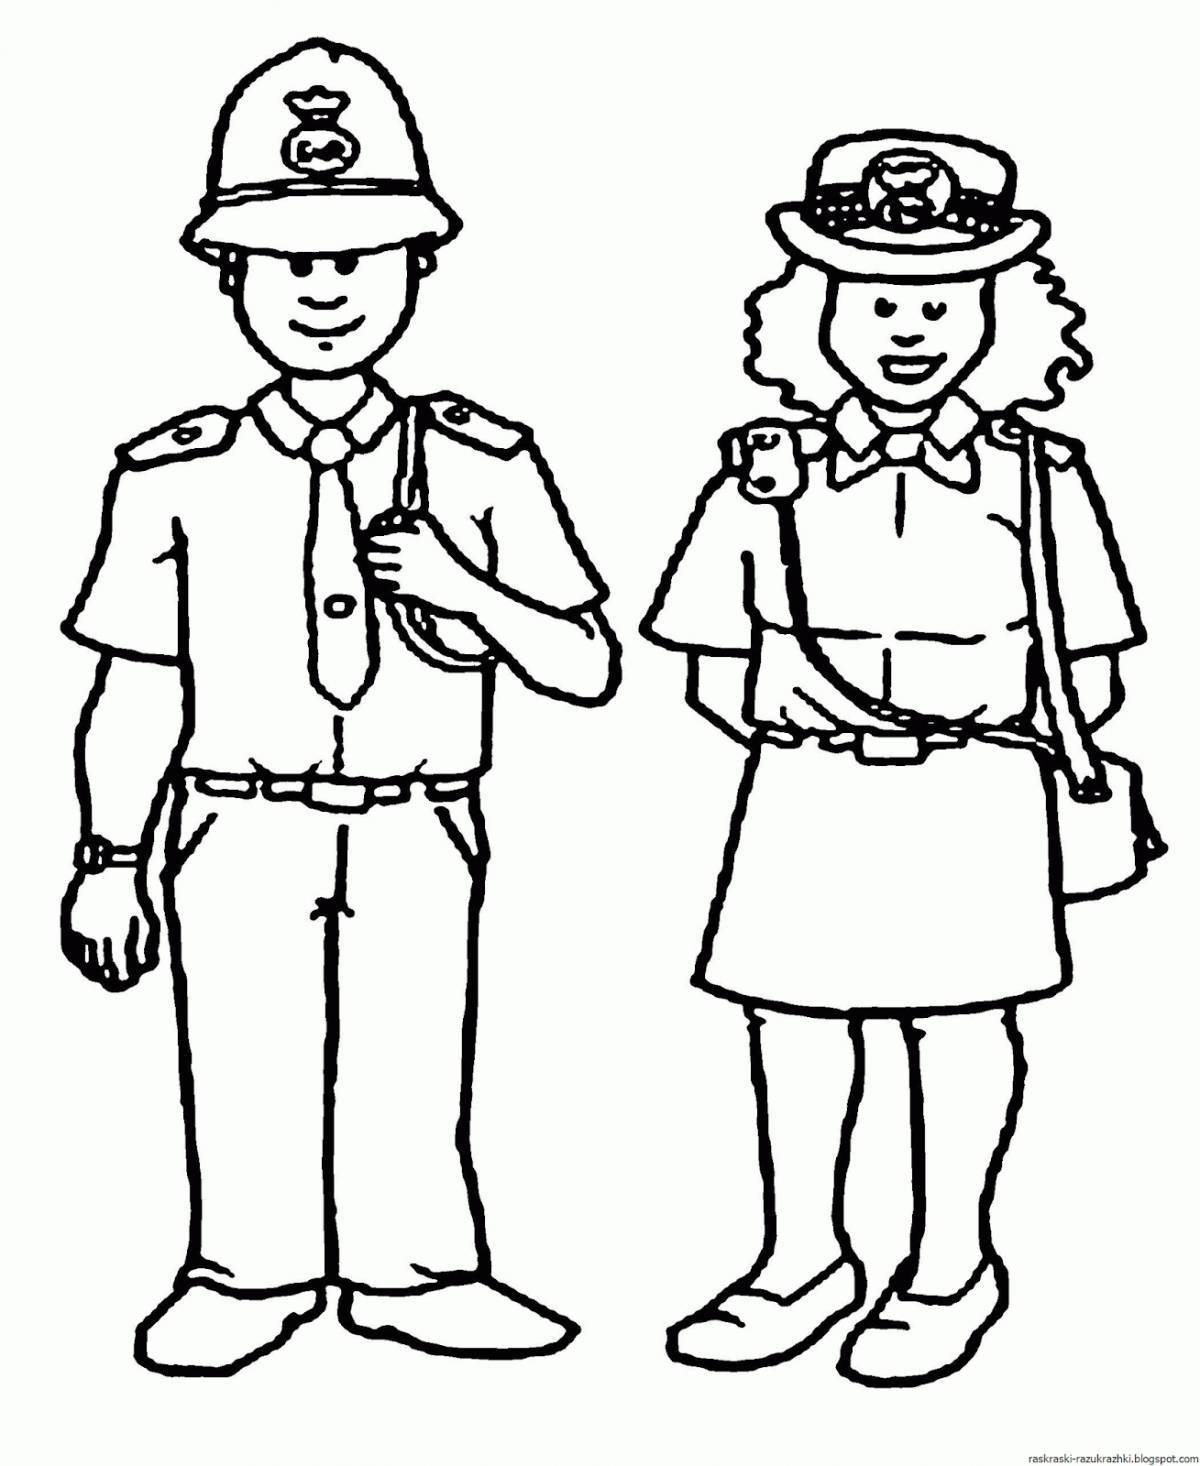 Joyful policeman coloring pages for kids